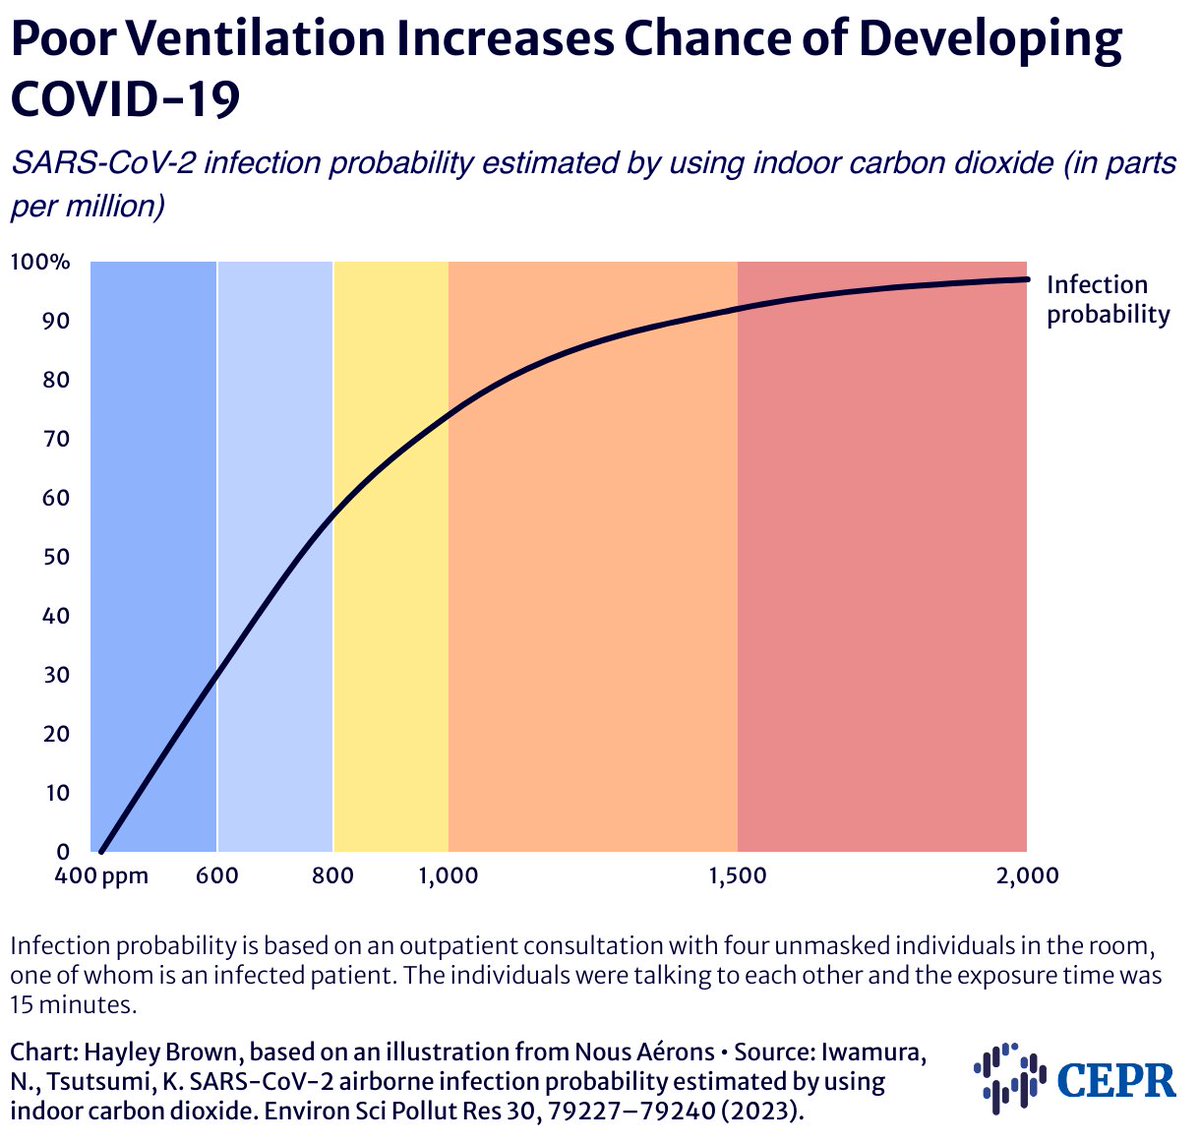 NEW: The public health emergency may have ended on paper, but we are still in a pandemic. #COVID isn't going anywhere until we prioritize robust indoor air quality standards (#IAQ) with proper ventilation and filtration. bit.ly/IAQ2024